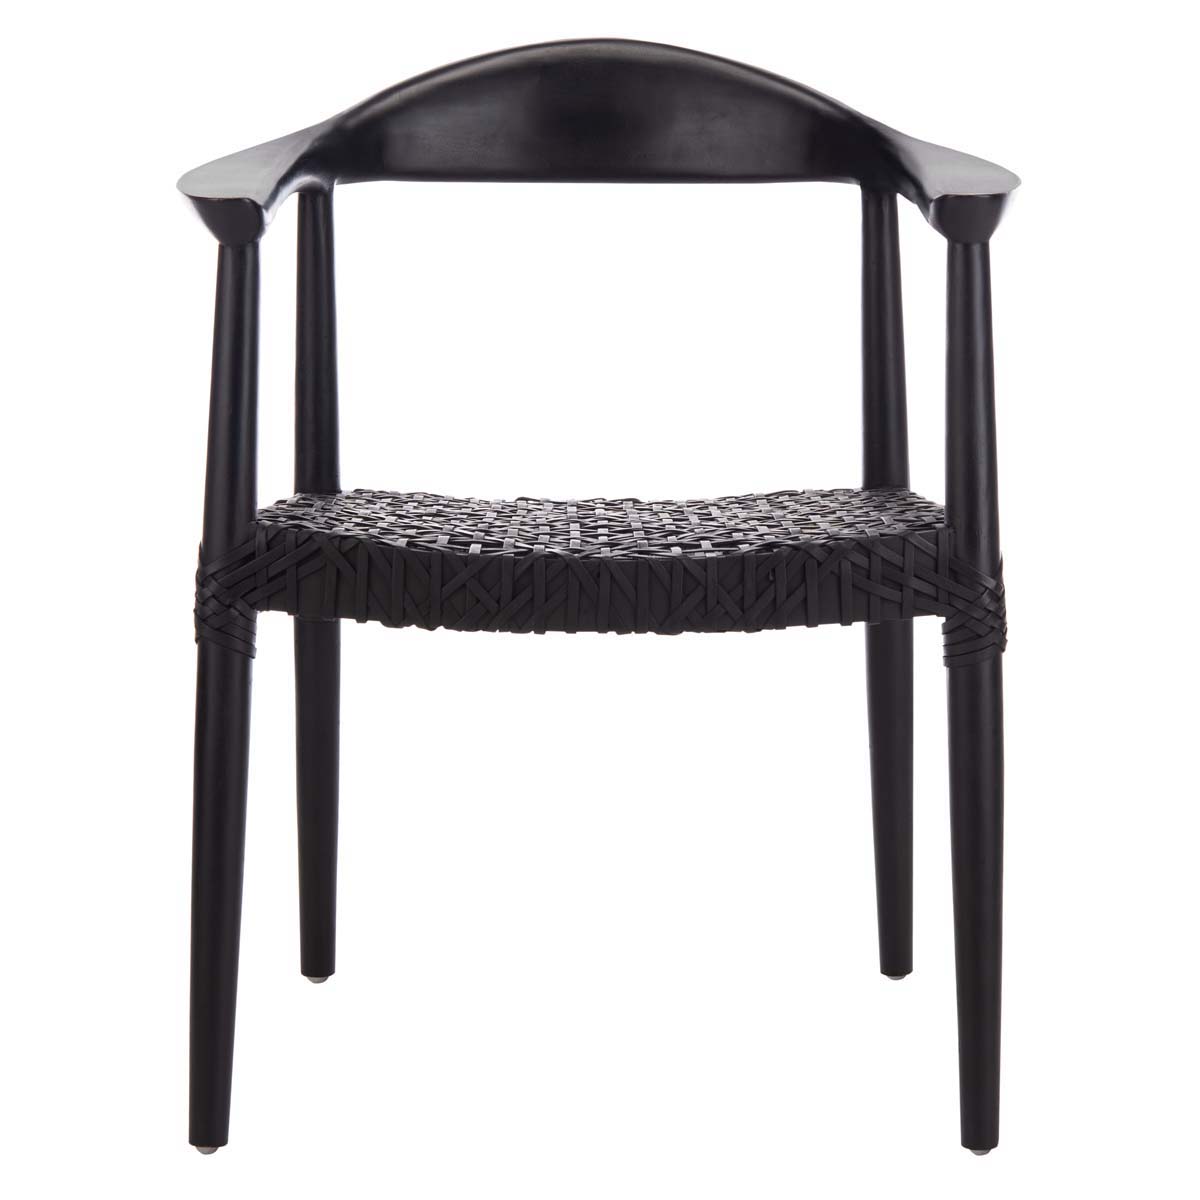 Safavieh Juneau Leather Woven Accent Chair , ACH1003 - Black Mindi Wood/Black Leather